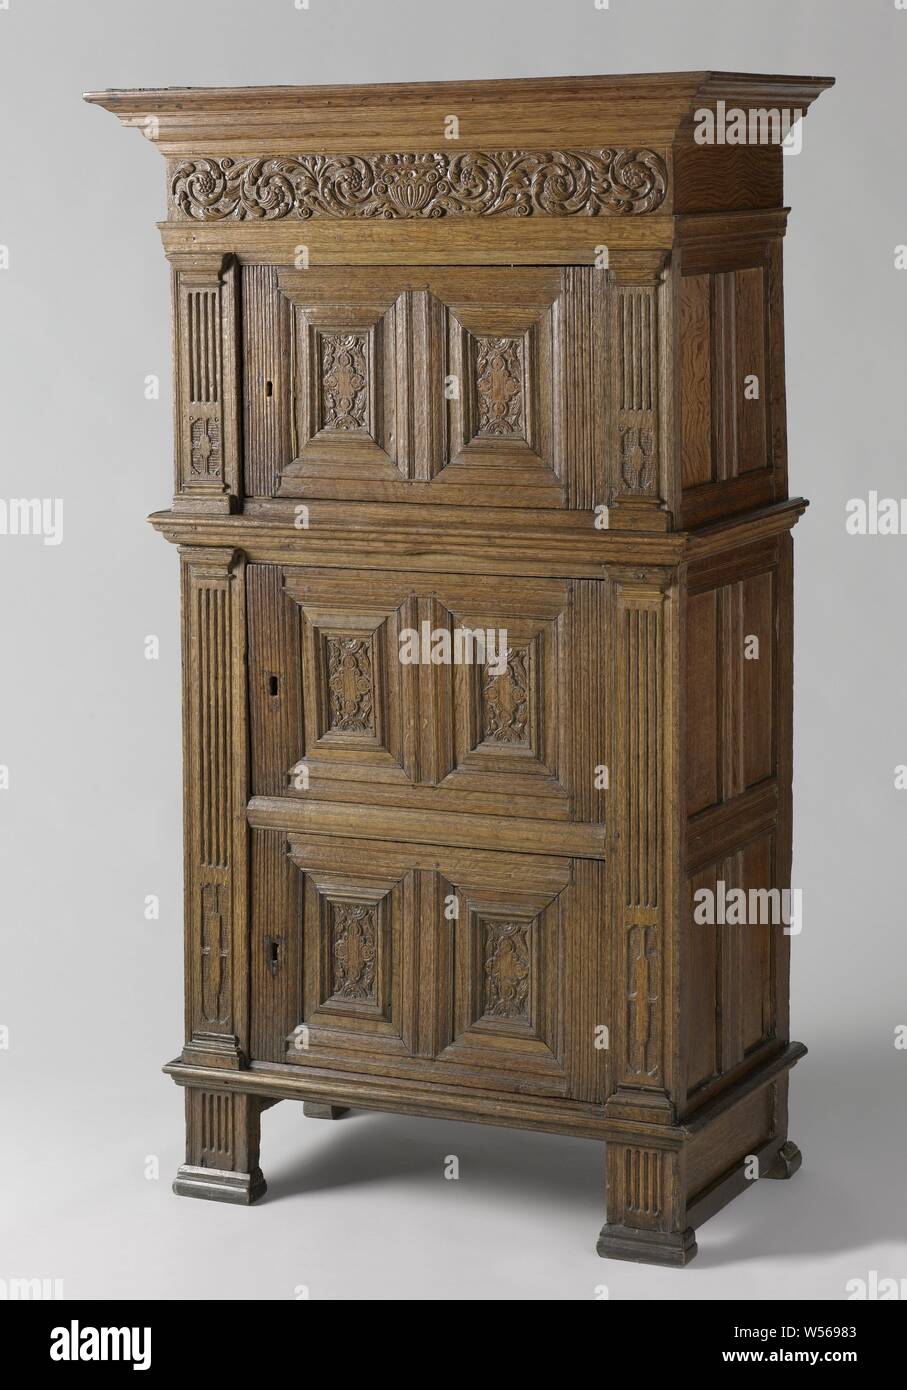 Oak cabinet with one-door upper cabinet and two-door lower cabinet, Oak cabinet, consisting of a one-door upper cabinet and a two-door lower cabinet. The corner posts bear Tuscan pilasters. The panels of the doors are decorated with a chain ornament and acanthus leaf within profiled frames. The main frame has a stabbed frieze with a fruit bowl, flanked by acanthus vines. The panels of the sides are unadorned., anonymous, Noord-Holland, c. 1600 - c. 1650, wood (plant material), oak (wood), h 172.5 cm × w 101 cm × d 55.5 cm Stock Photo